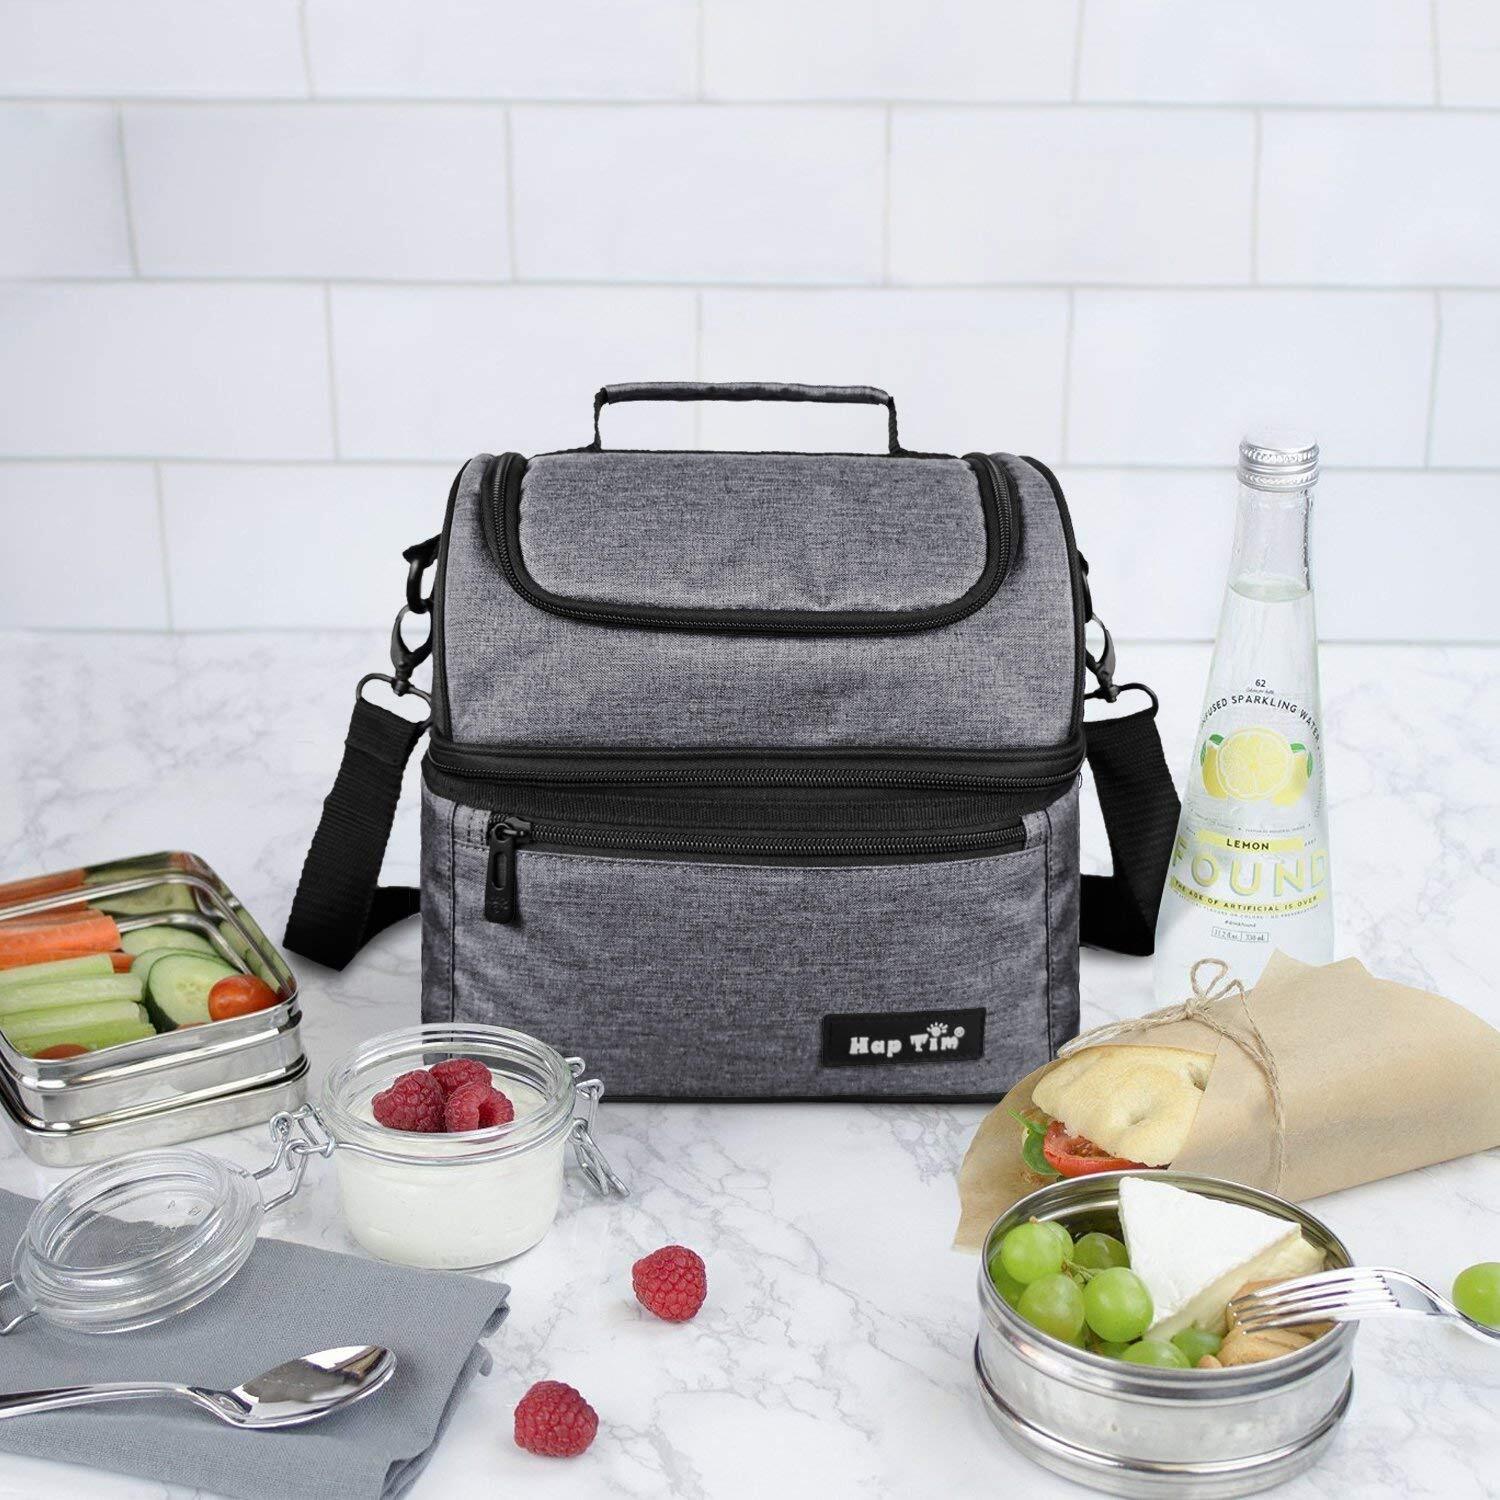 https://images.51microshop.com/1658/product/20180927/Hap_Tim_Lunch_Box_Insulated_Lunch_Bag_Large_Cooler_Tote_Bag_16040_G__1538017309105_1.jpg